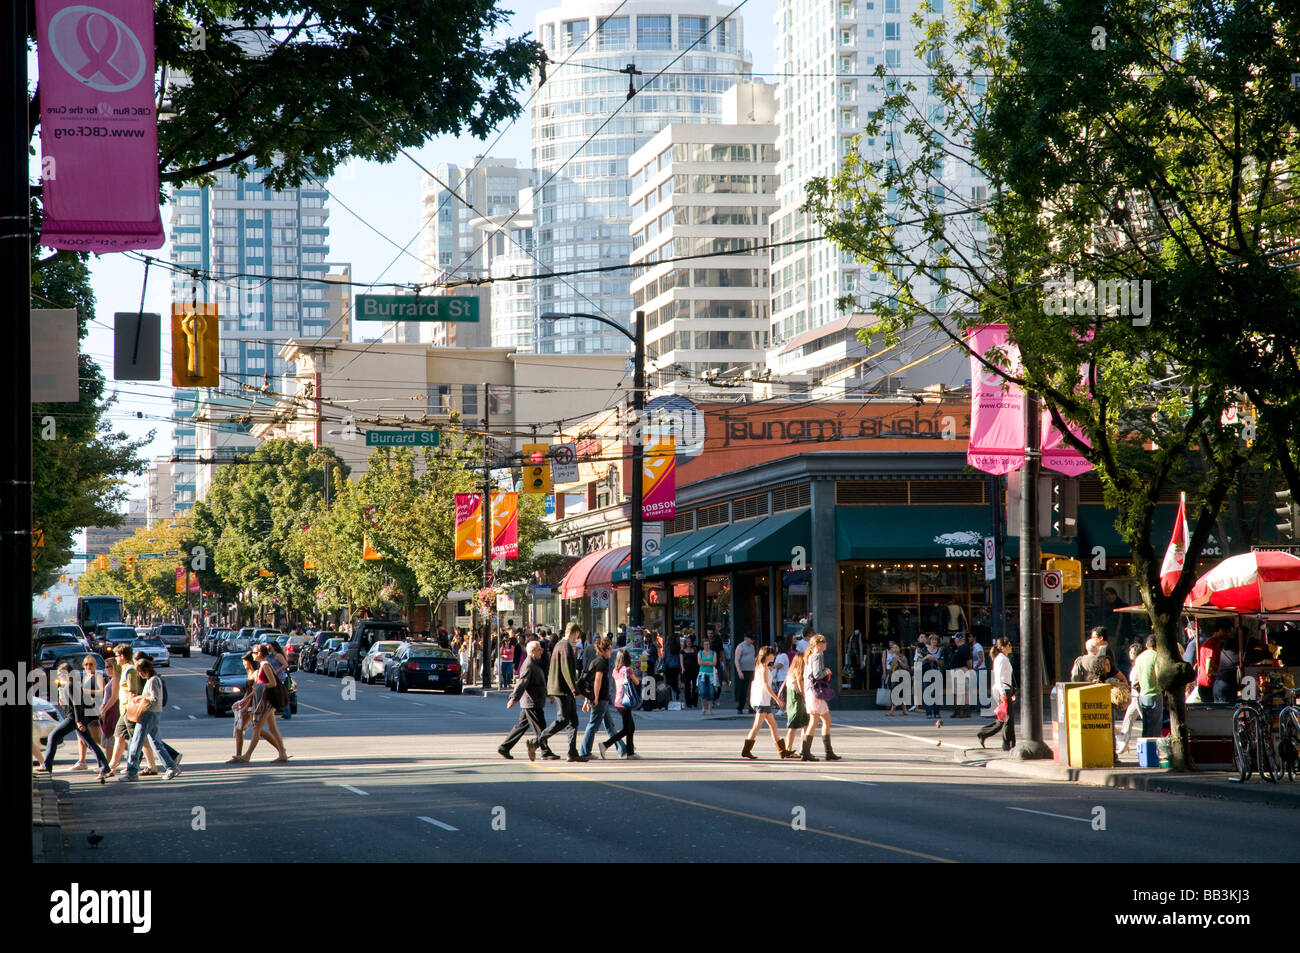 Looking down Robson street, one of the main shopping streets of